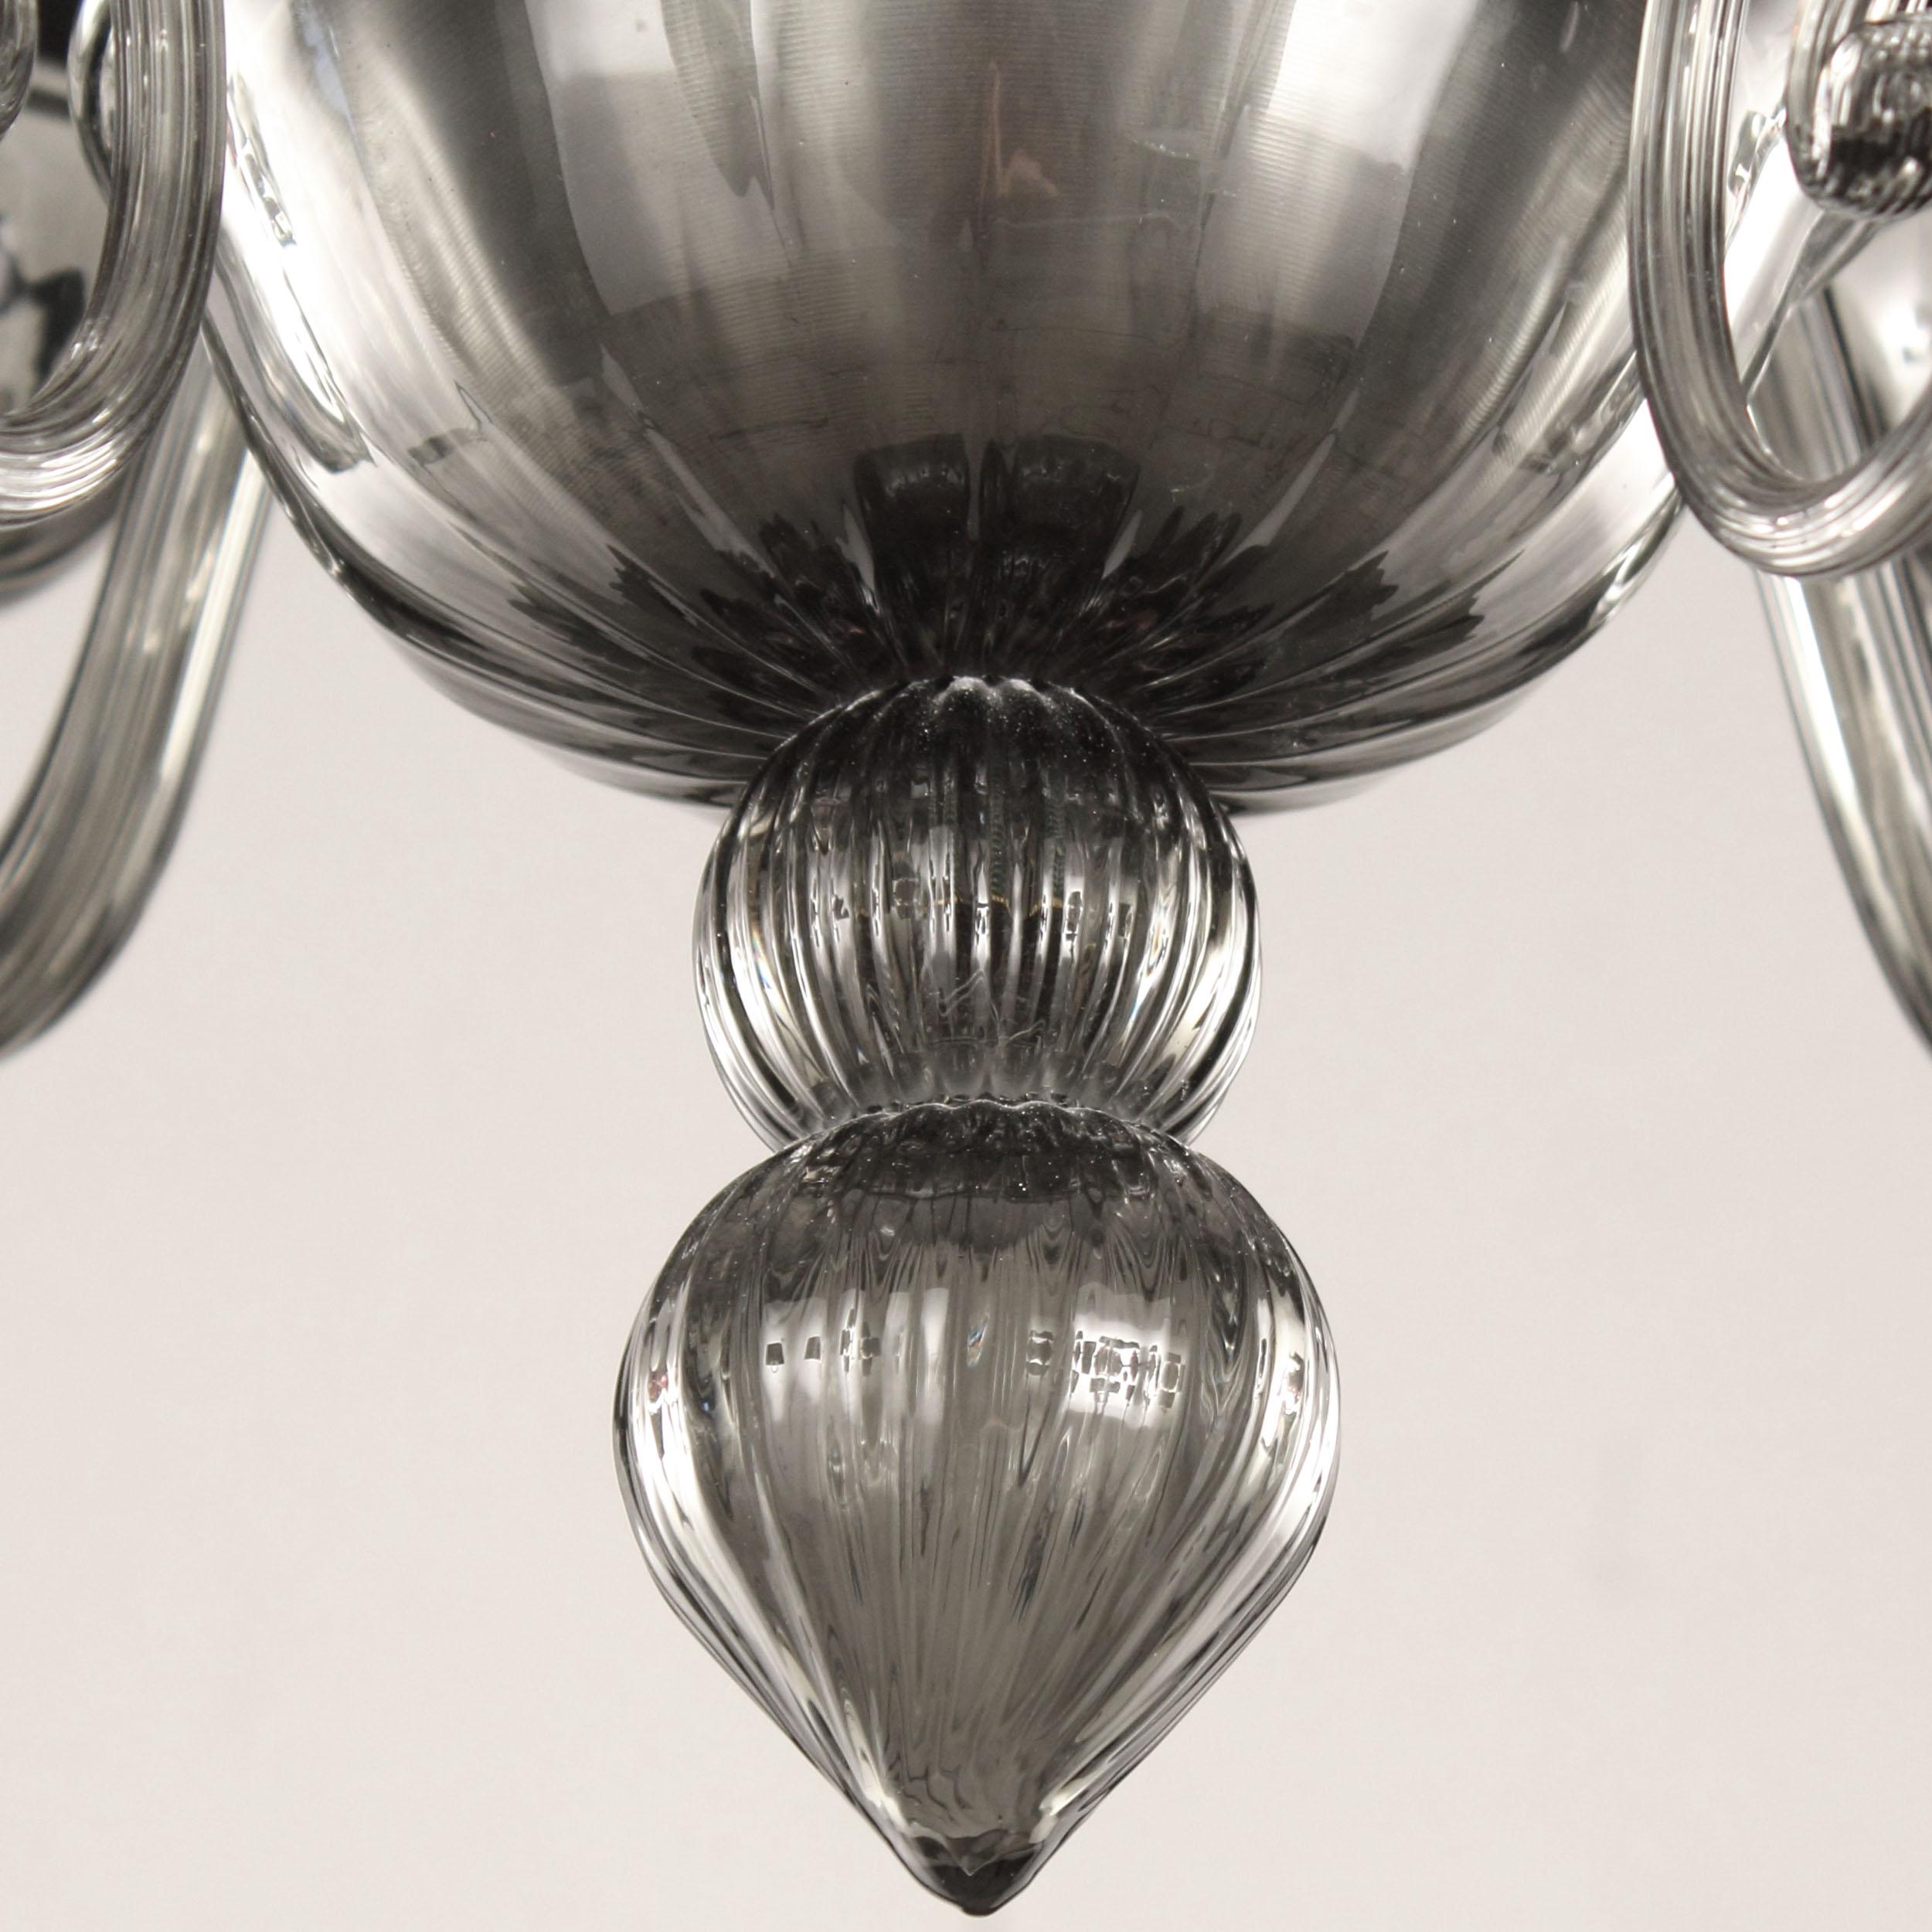 The Murano chandeliers Gatsby Naked collection is a special edition of the Gatsby collection. The structure of the chandeliers is the same of the Gatsby chandeliers, but here the plissè fabric truncated cone lampshades are susbituted with cups that